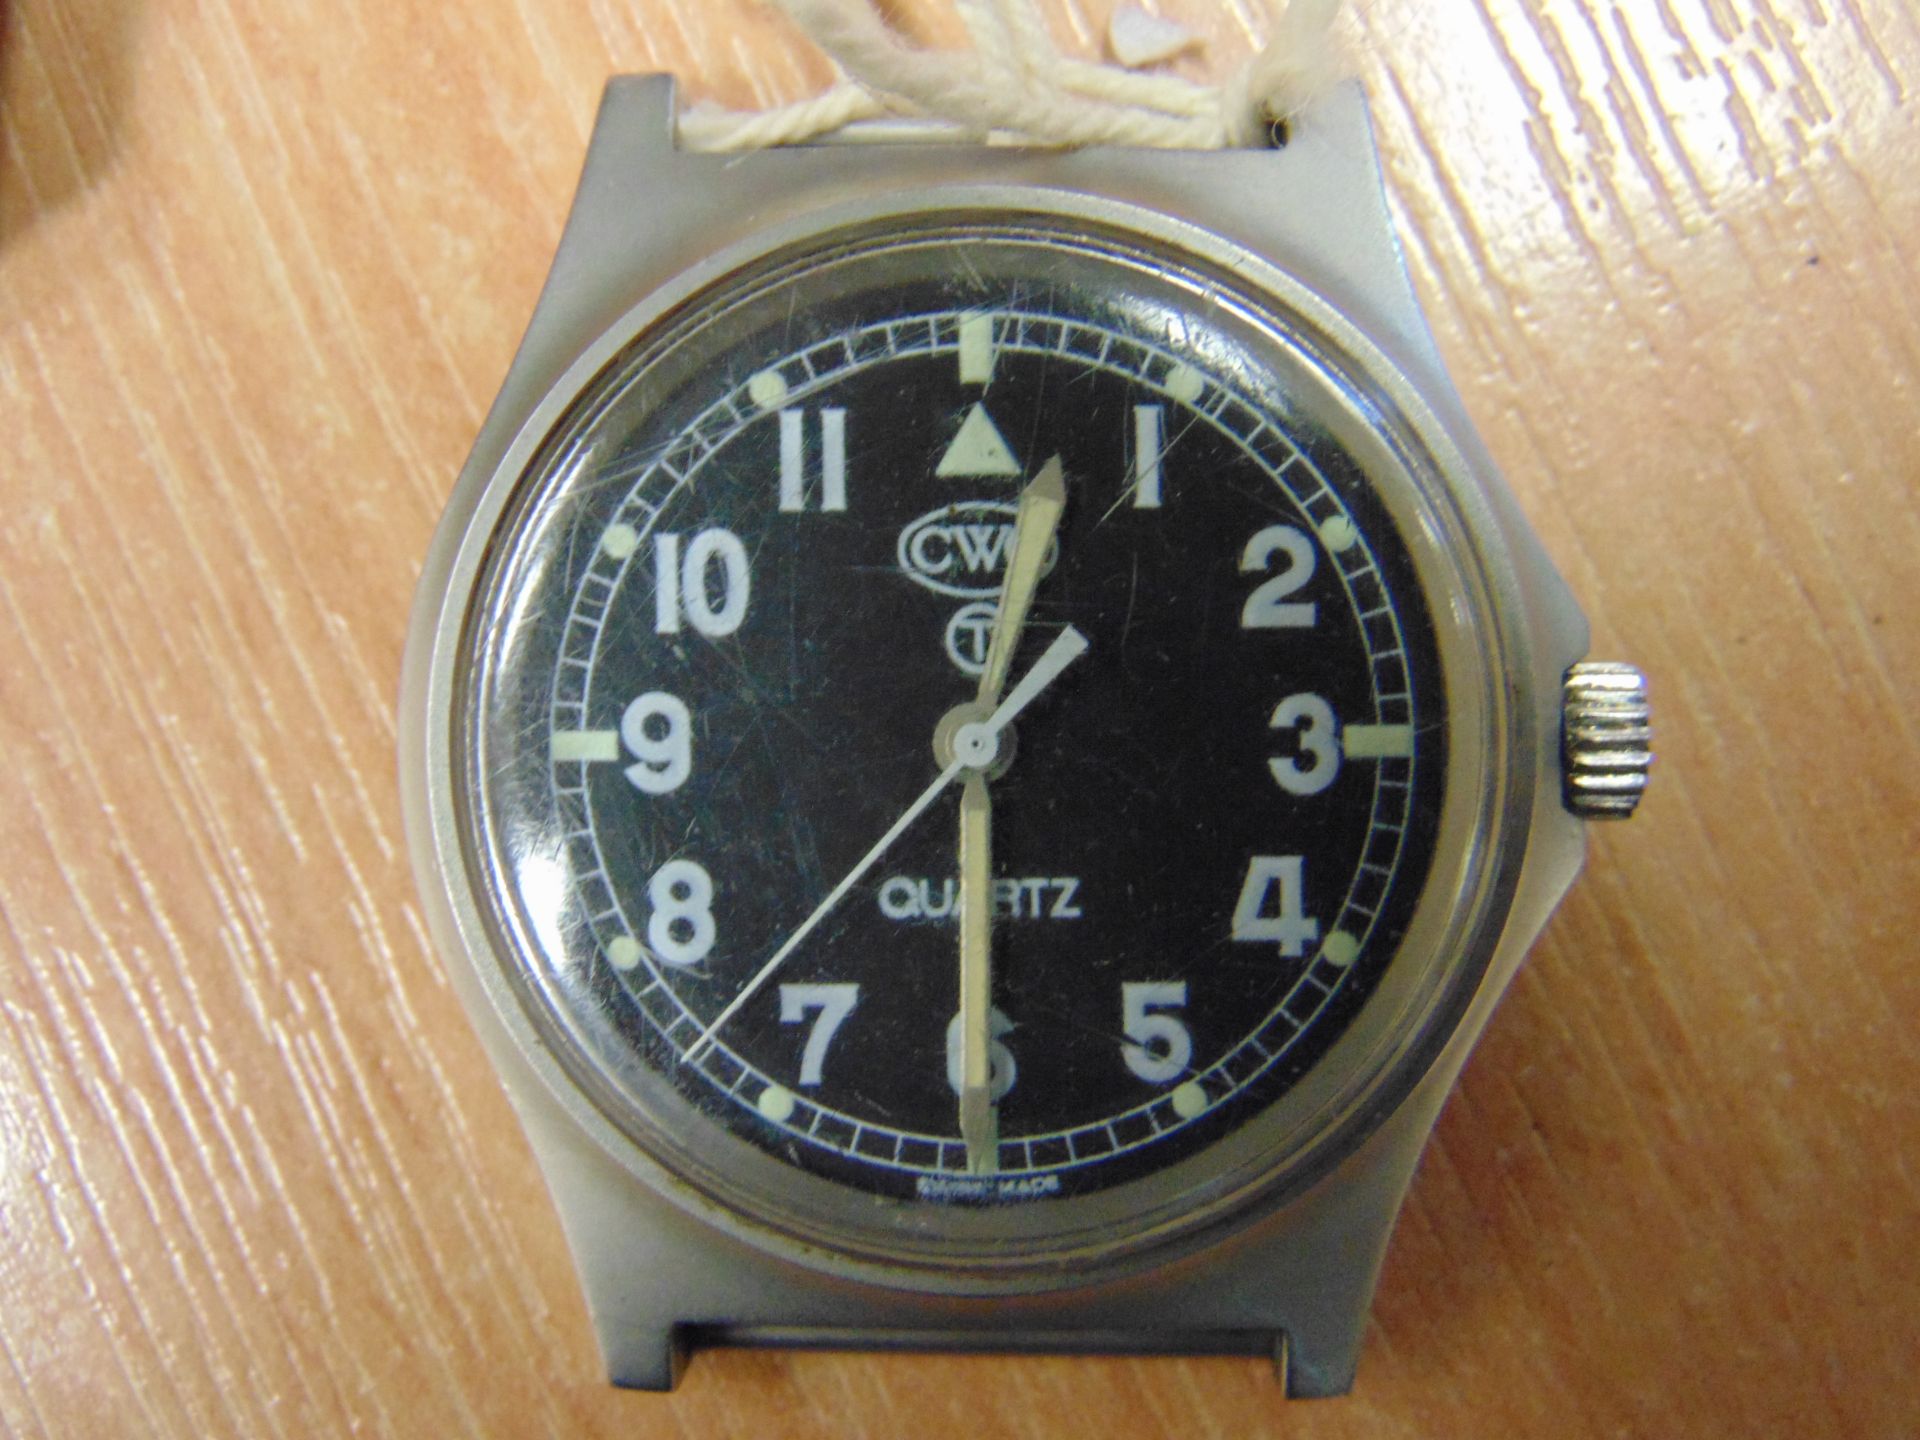 2x CWC QUARTZ 0552 ROYAL NAVY/ MARINES ISSUE SERVICE WATCHES UNTRIED AND UNTESTED DATED 1989/1990 - Image 5 of 6